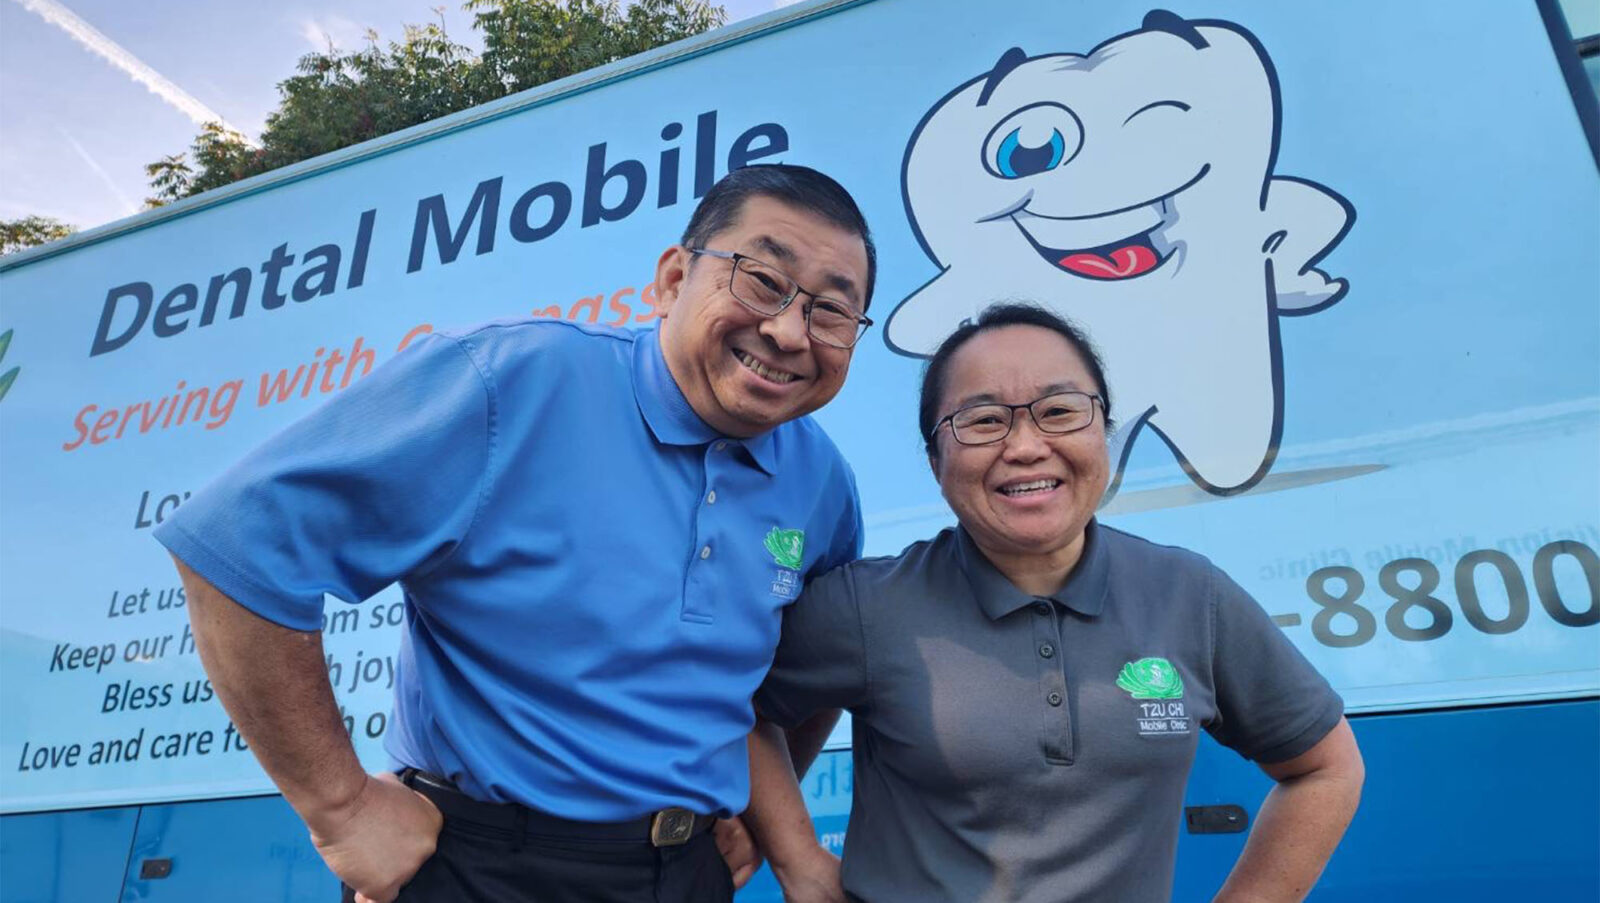 In front of the Tzu Chi Dental Mobile Clinic, Steve and Olivia posed according to the dental illustrations on the car